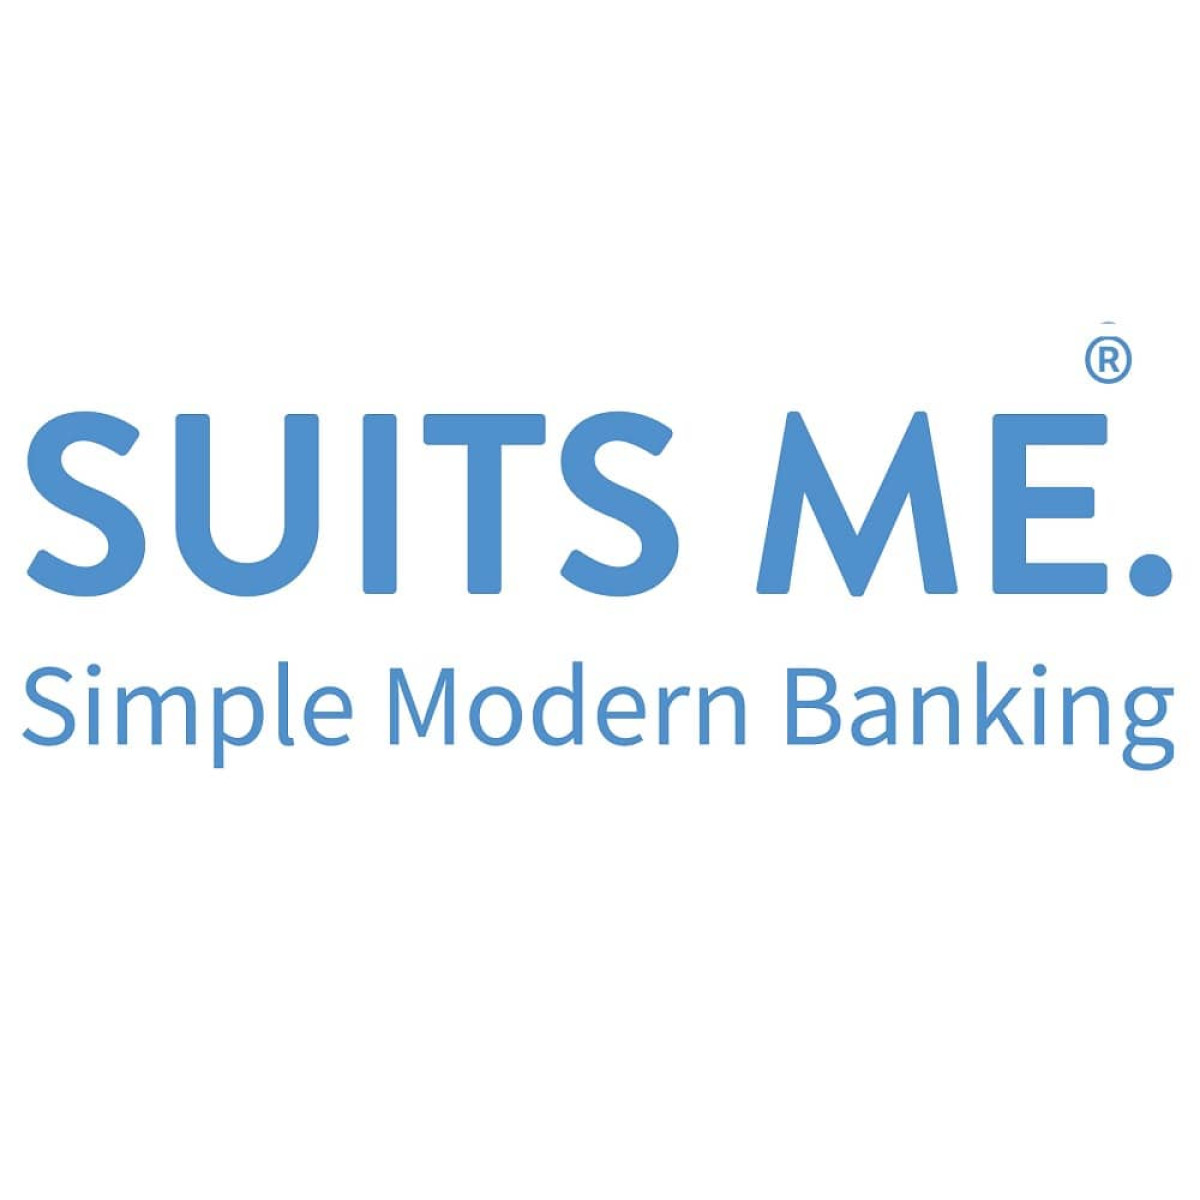 Discover How to Order a Suits Me. Credit Card